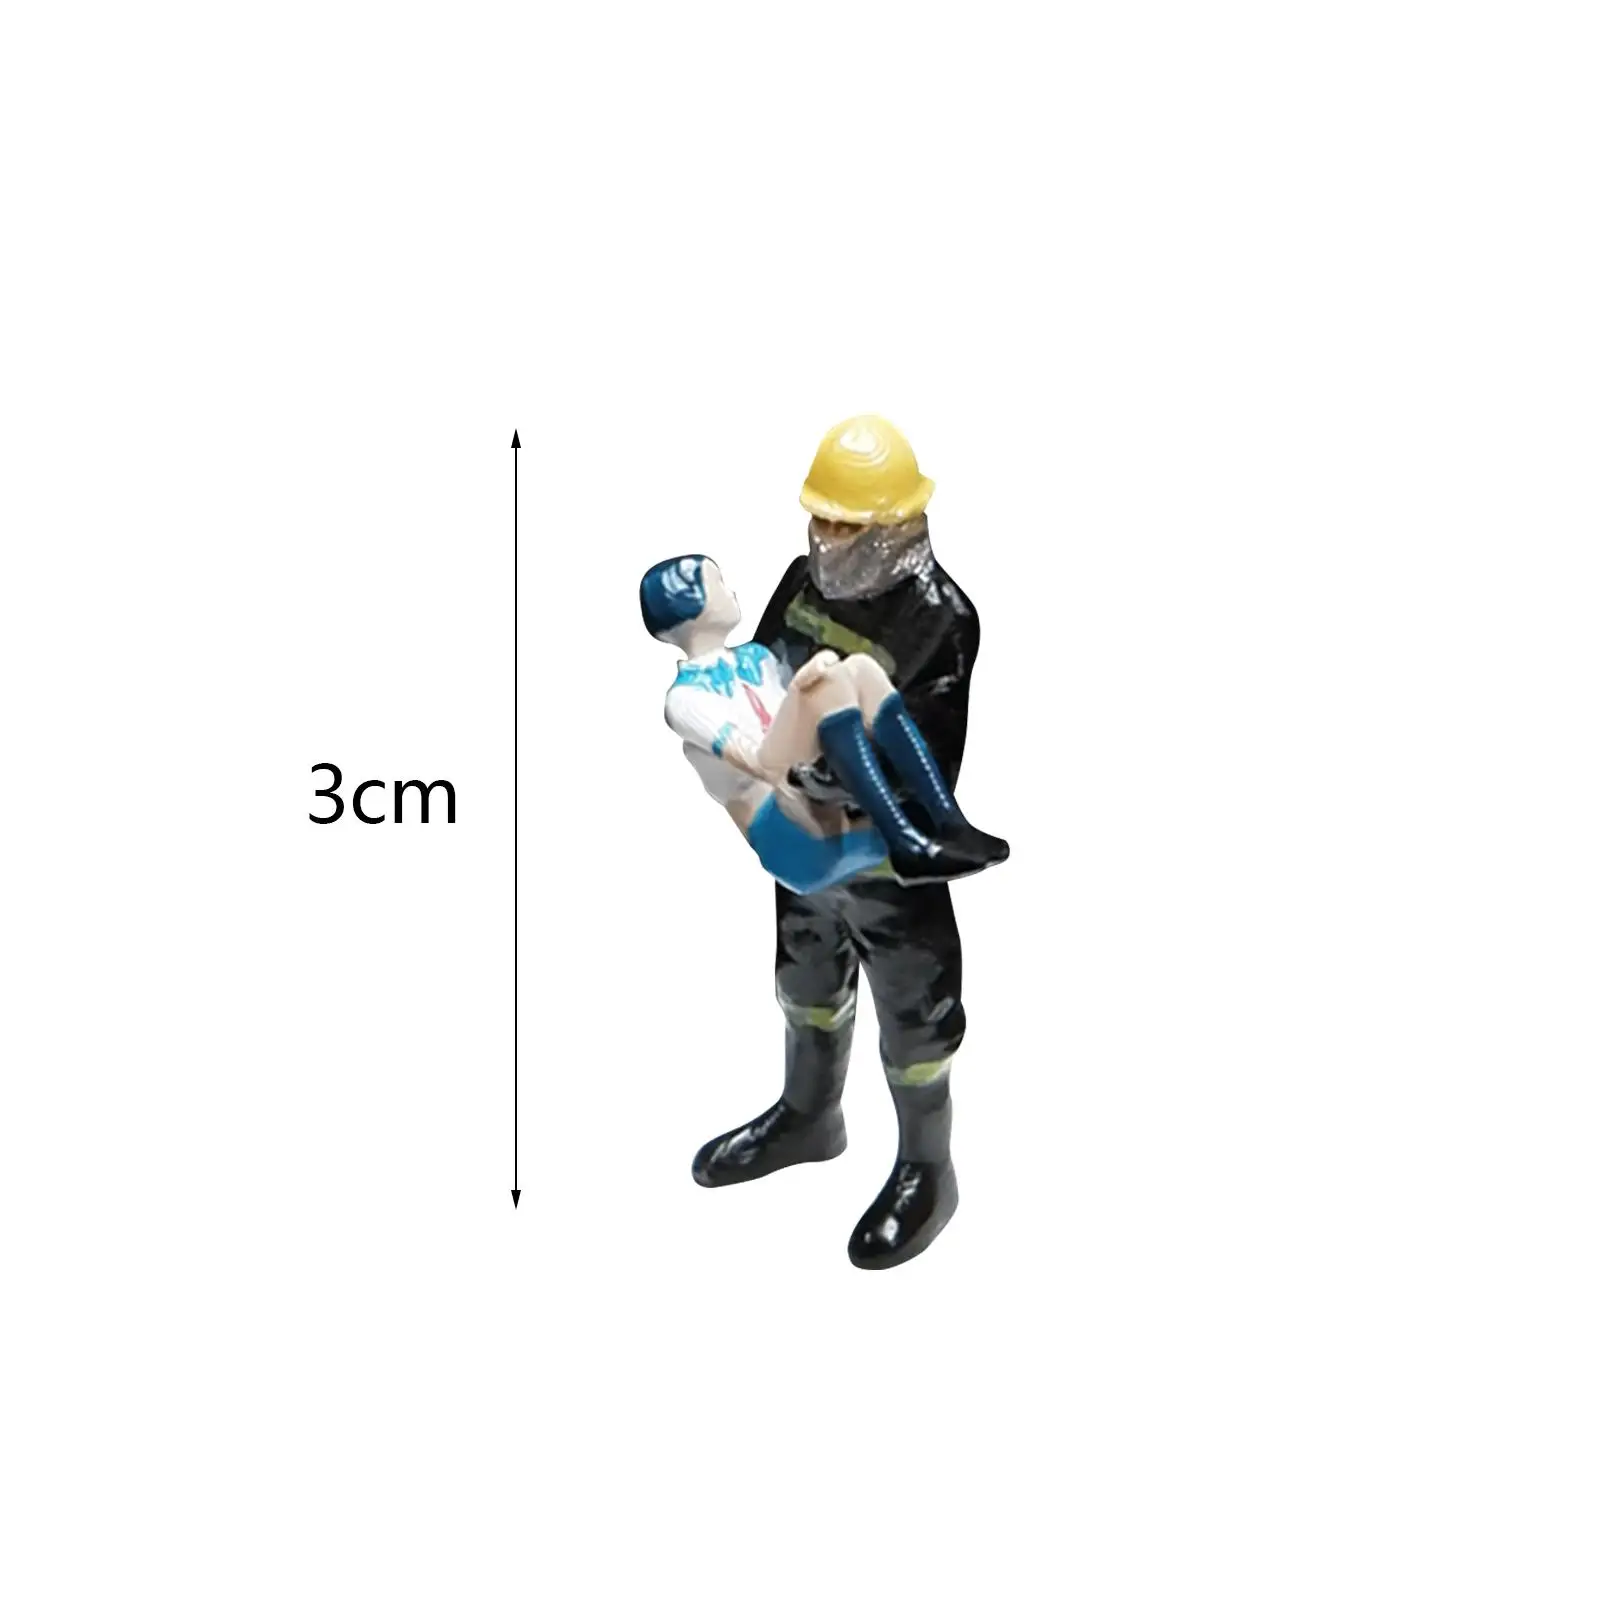 3cm People Figurines Simulation Miniature Toy Fireman Action Figure Firefighter Dollhouse Play Figure for Role Play Dollhouse